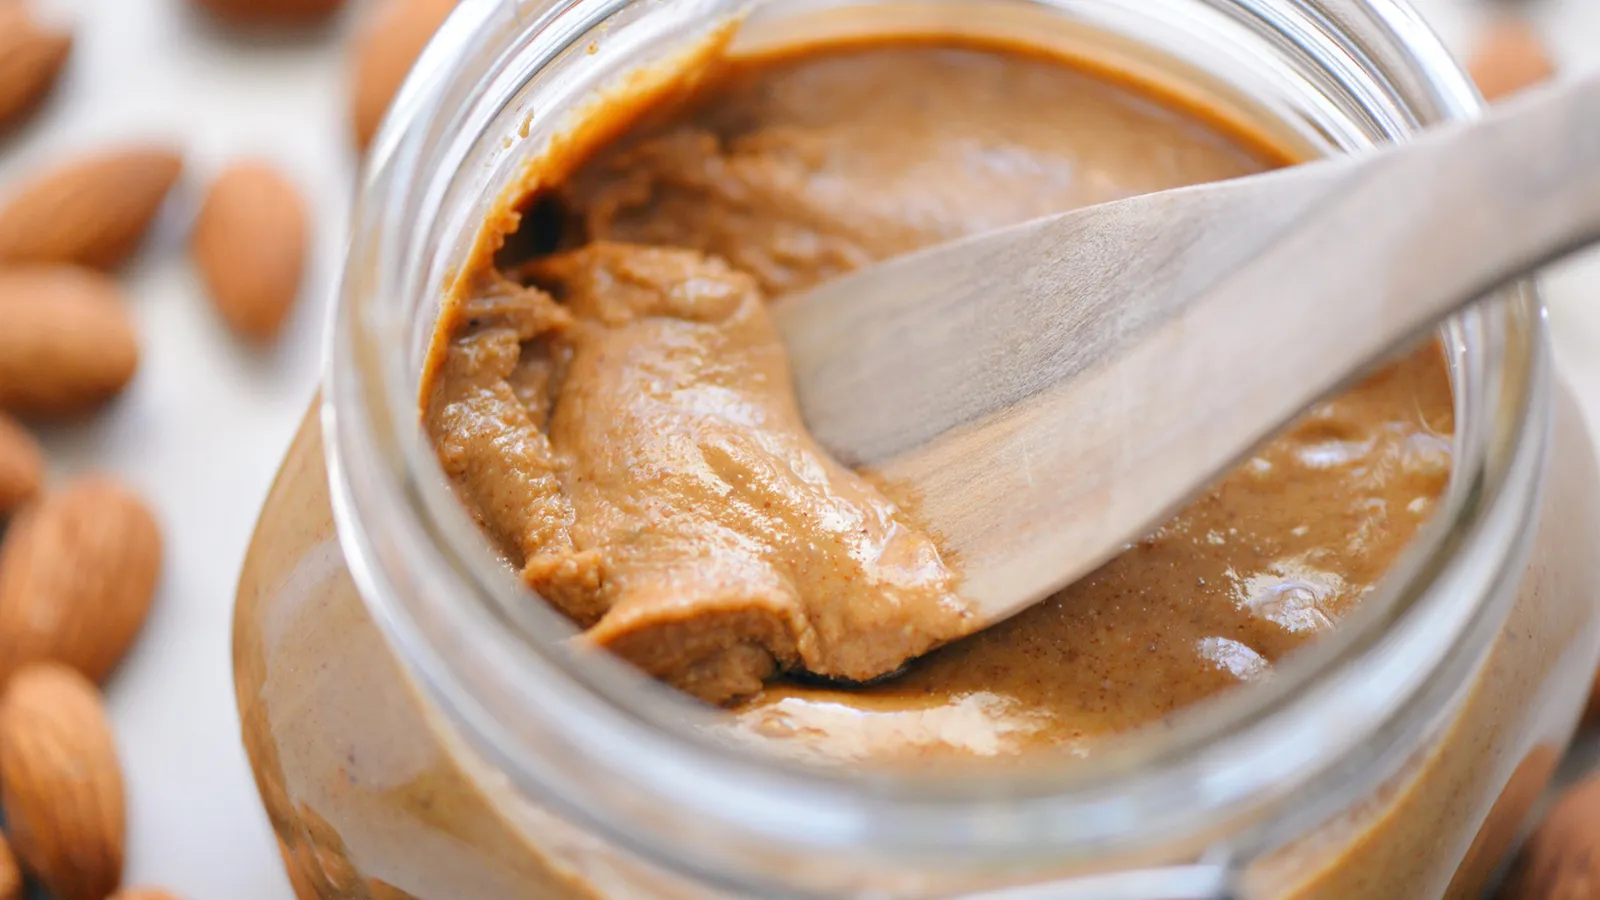 Are nut butters bad for your health?